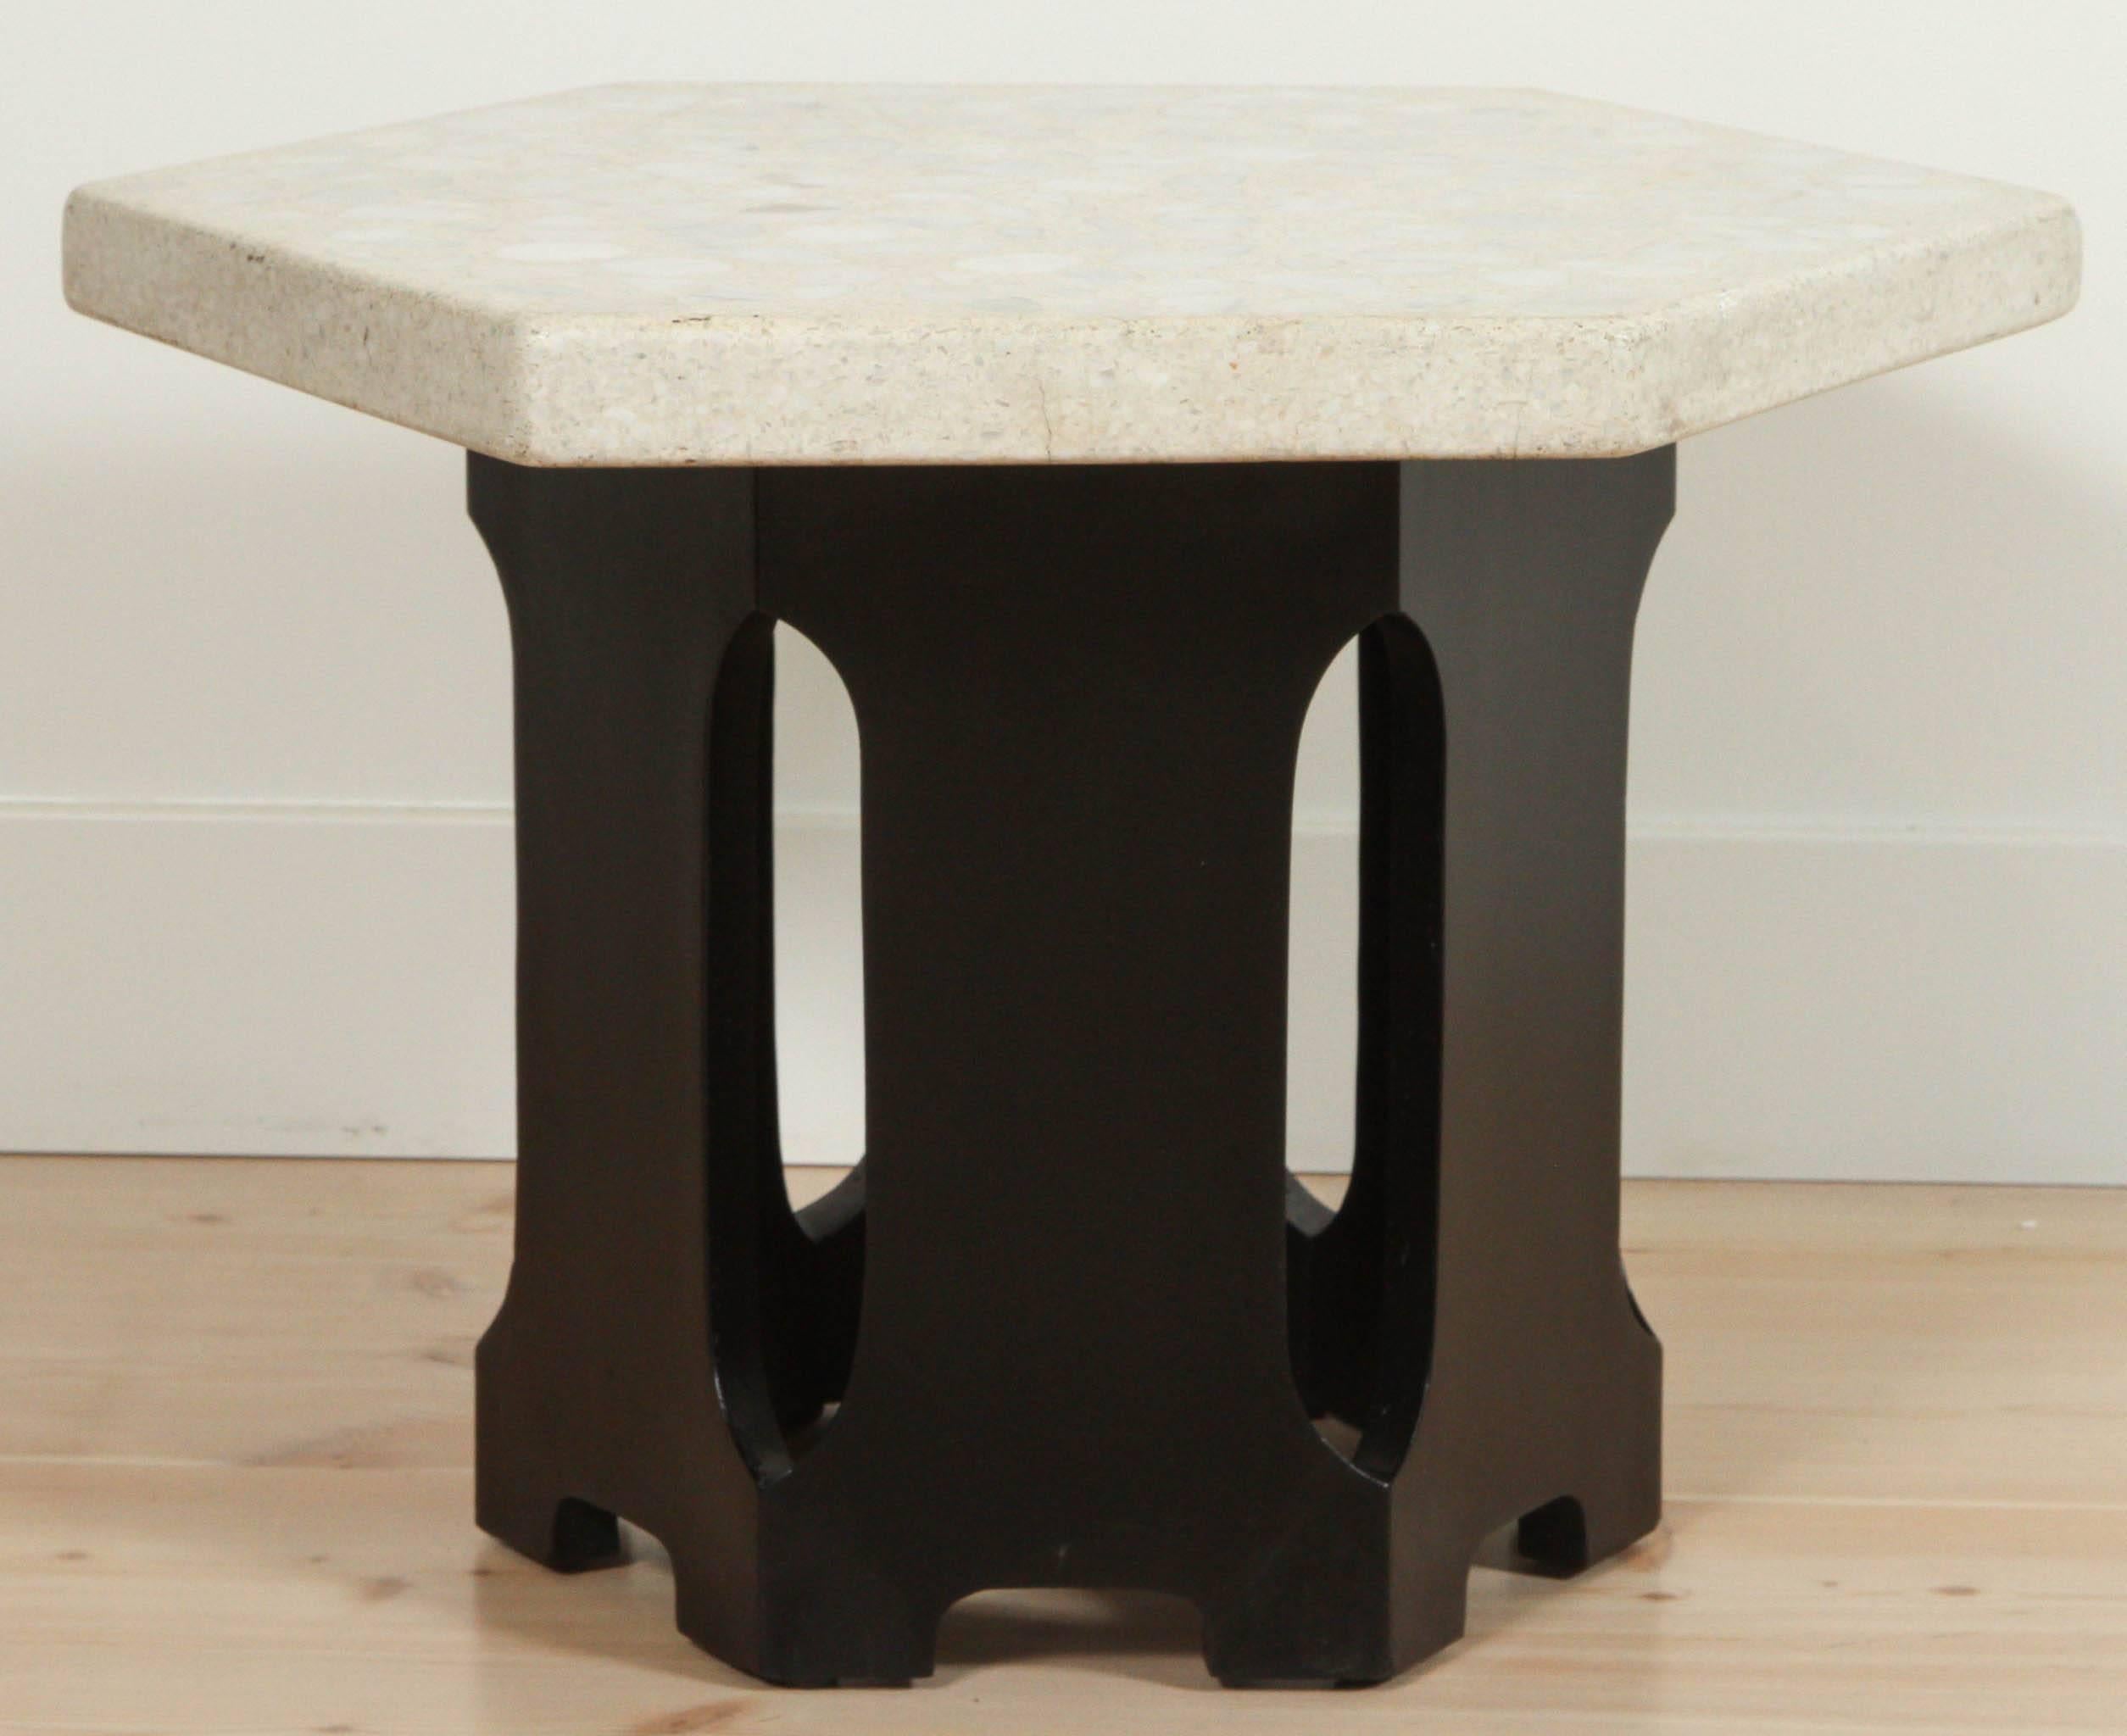 Terazzo and walnut hexagon side table by Harvey Probber.